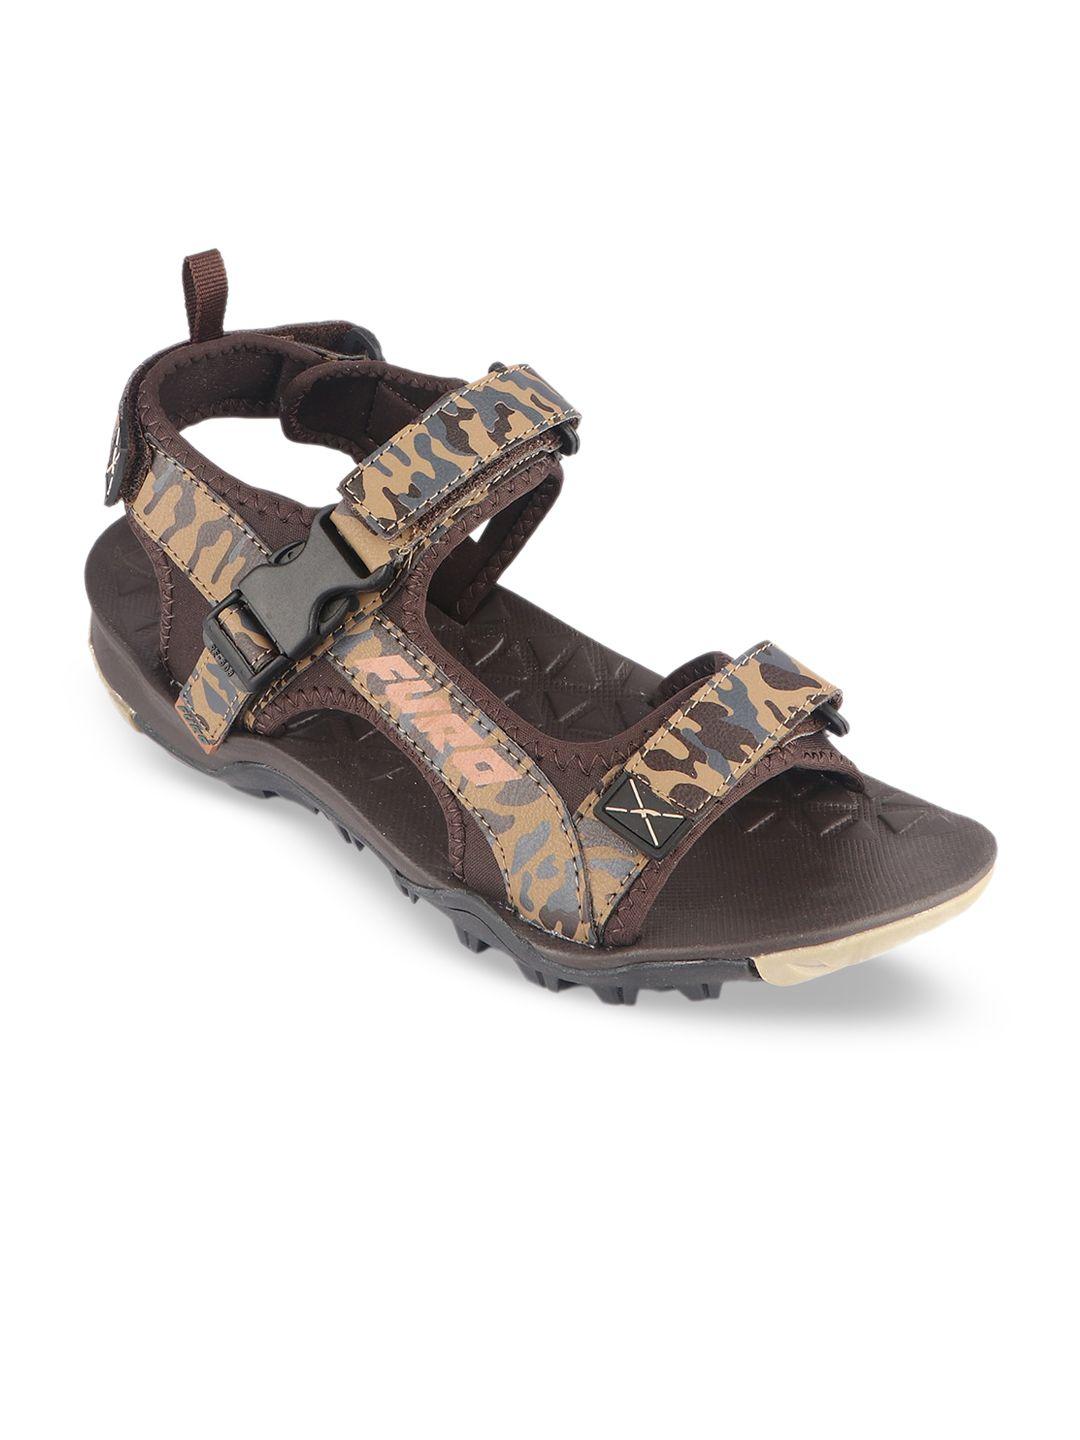 FURO by Red Chief Men Printed Sports Sandals